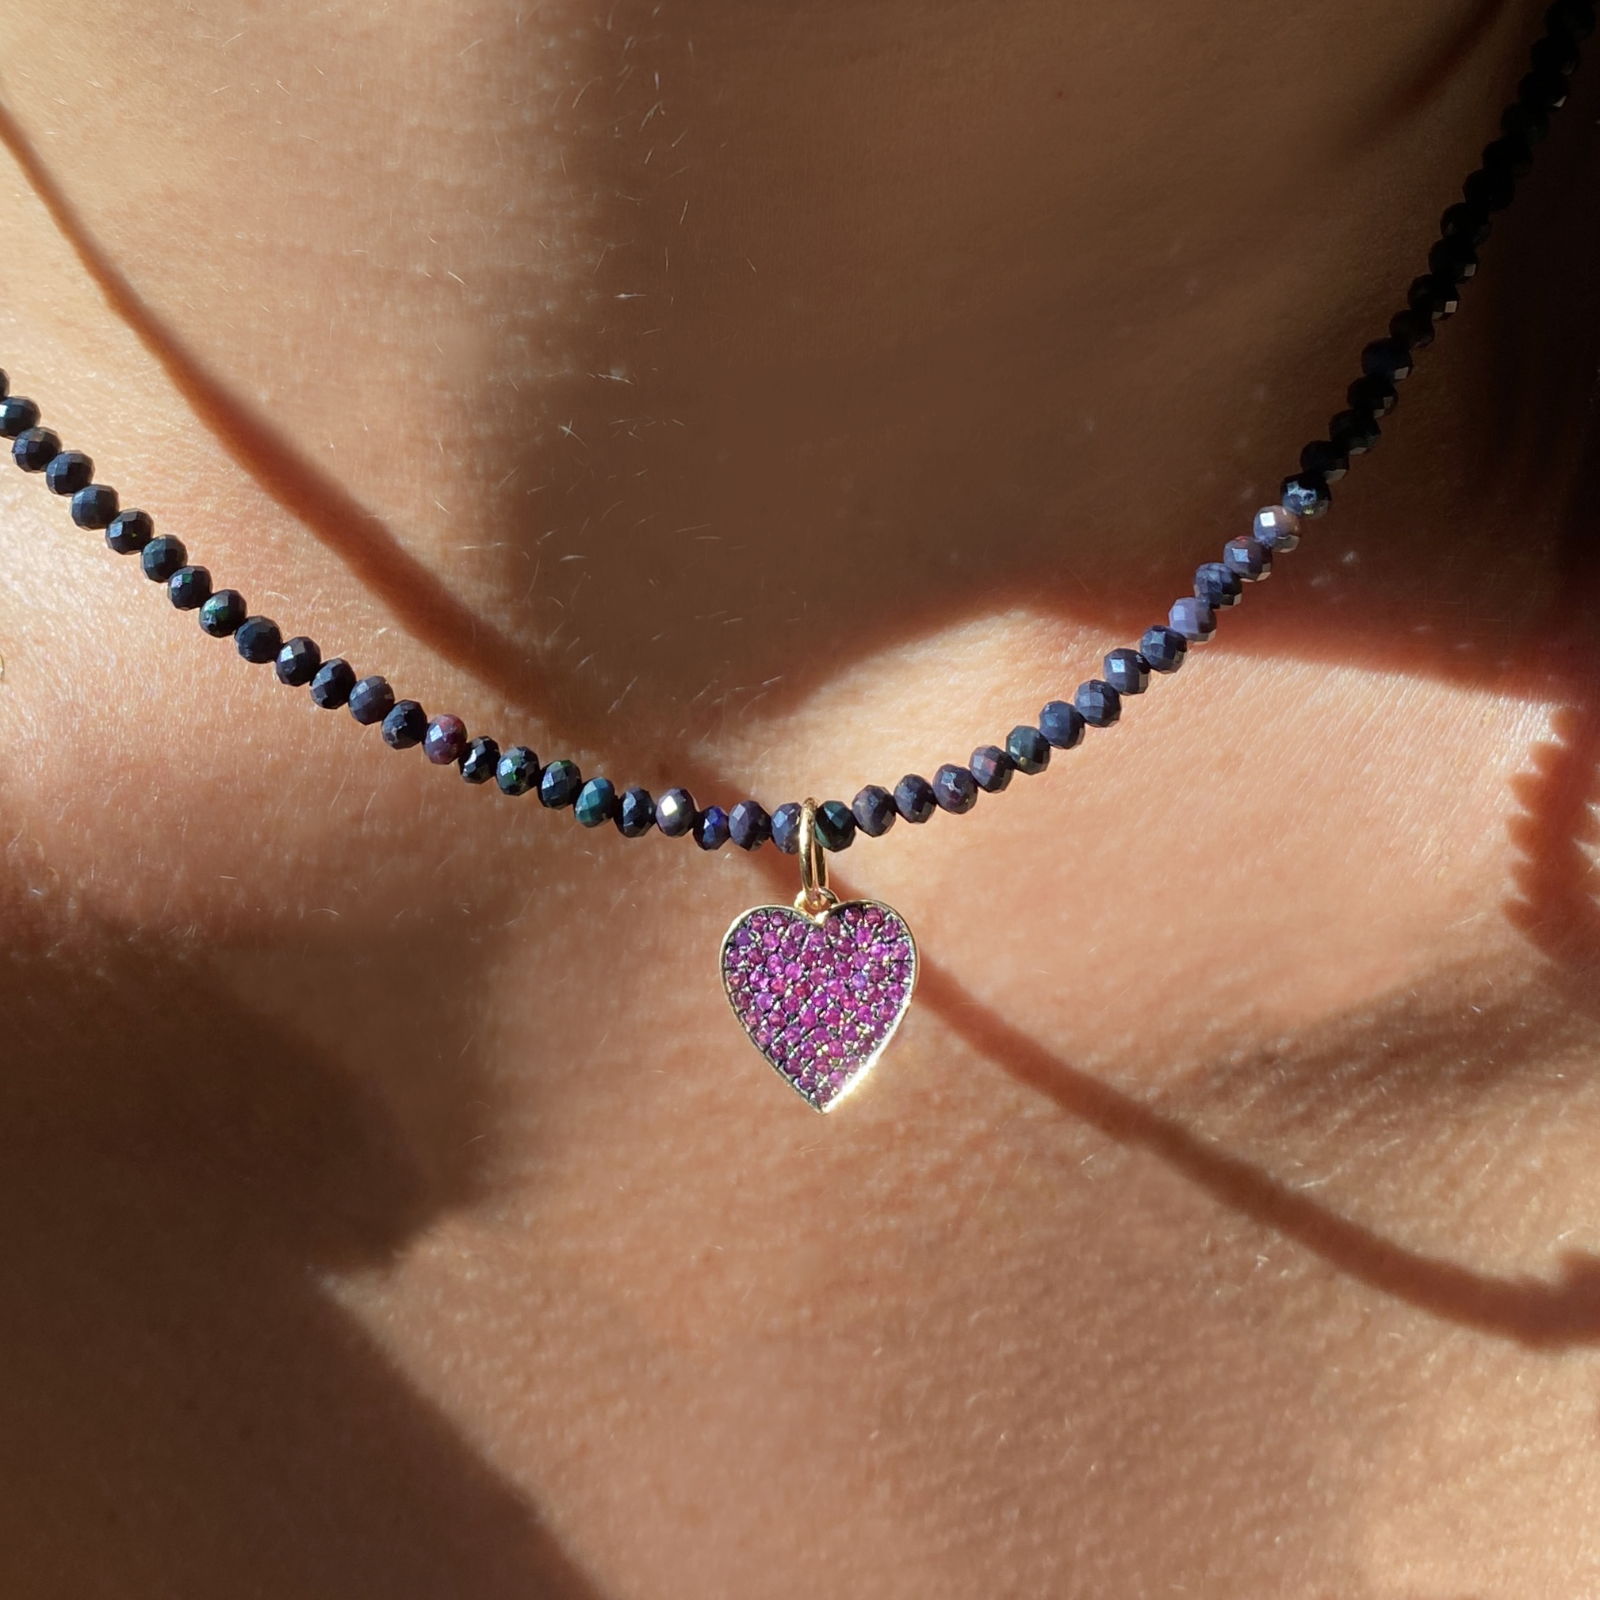 14k yellow gold medium pink stone pave blackened heart charm. Styled on a neck hanging from a beaded necklace.